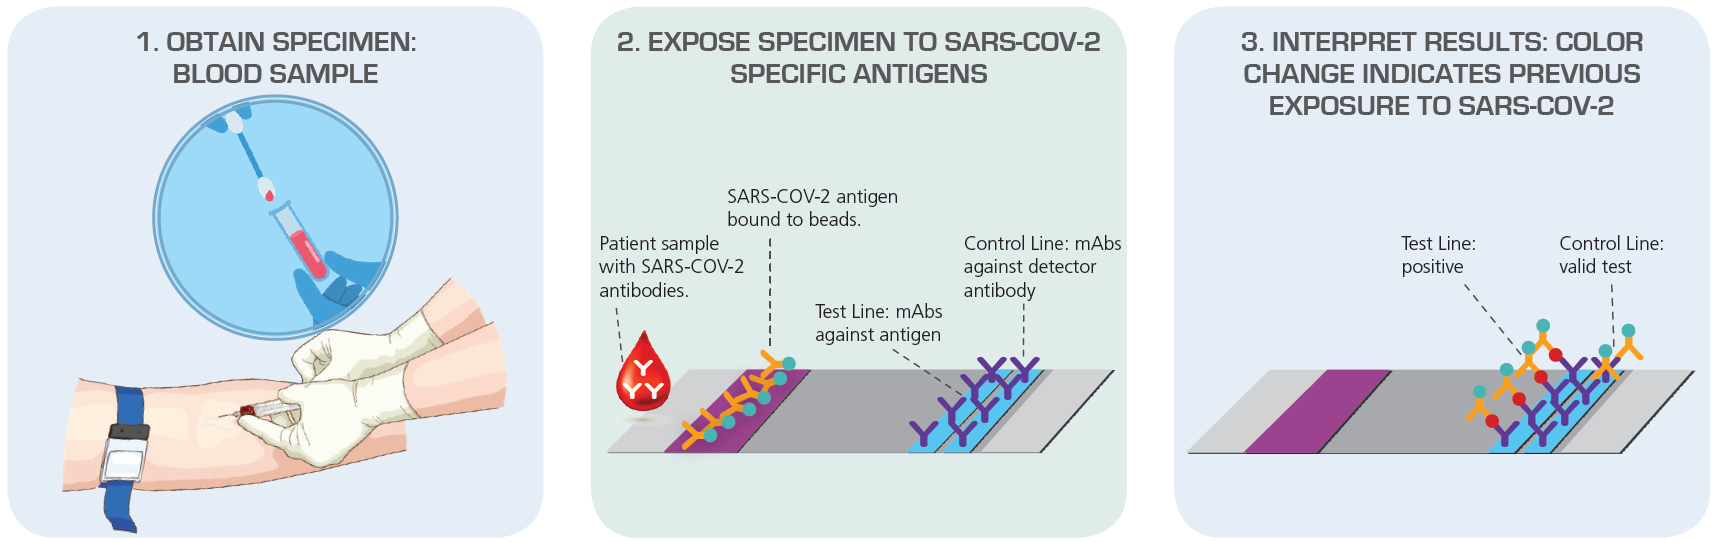 Antibody Test (Serology) Detect Immune Response to SARS-CoV-2 Exposure Source: American Society for Microbiology